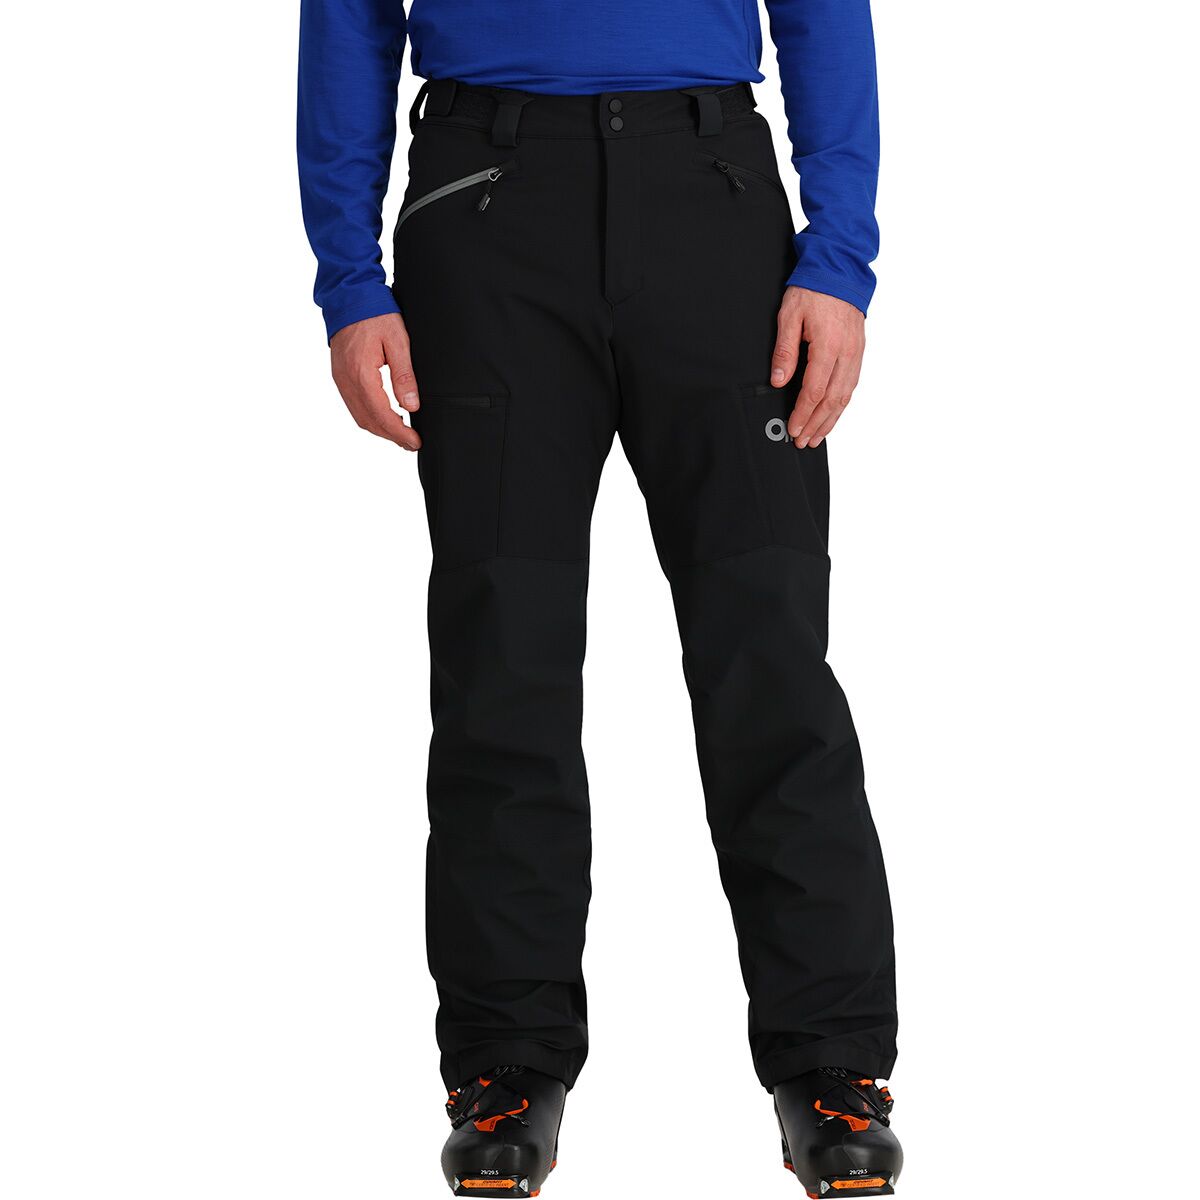 Outdoor Research Trailbreaker Tour Pant - Men's - Clothing